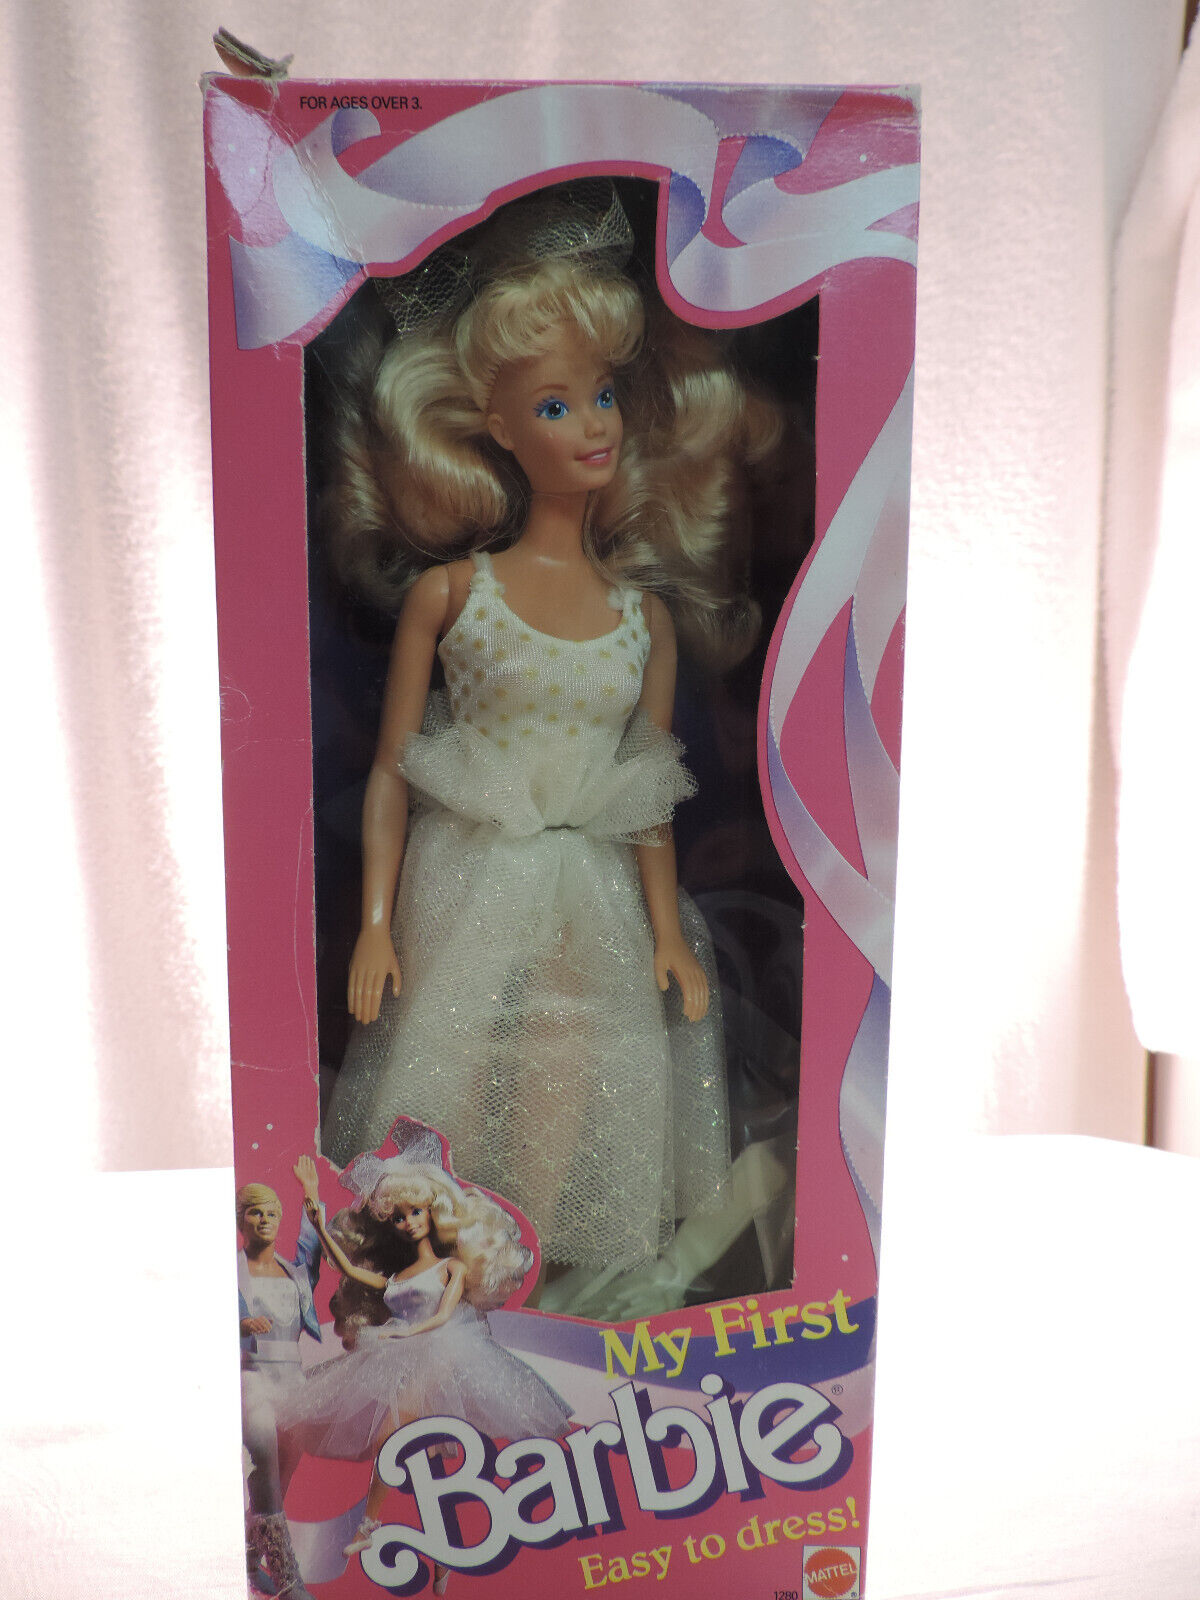 My First Barbie Doll Easy to dress! - Mattel #1280 - 1988 - NRFB